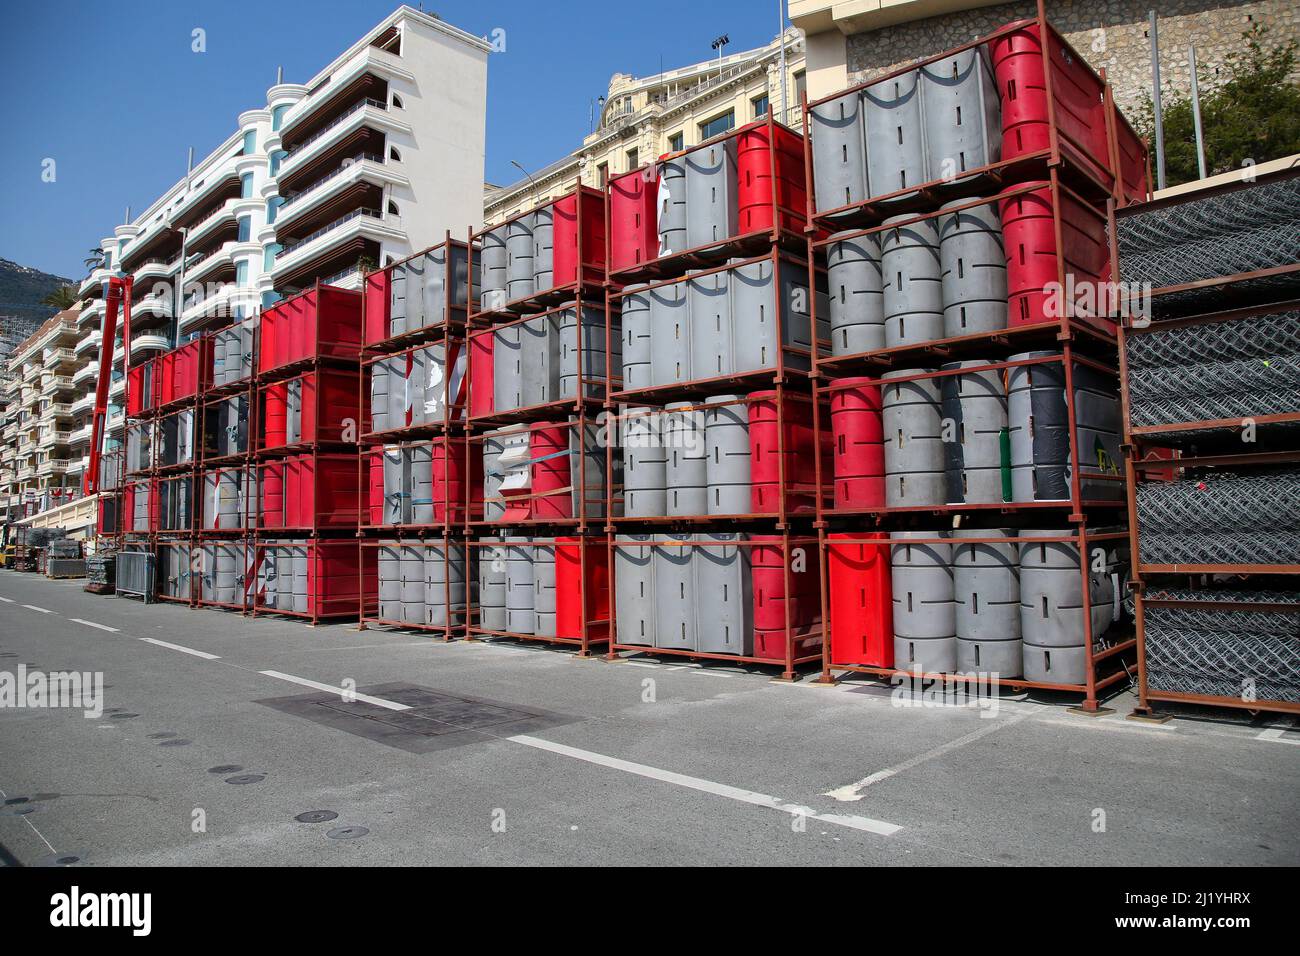 Monte Carlo, Monoco. 28 Mar 2022 - Piles of barriers for Monte Carlo Grand Prix Formula 1 race. The race takes place on 29 May 2022. Credit Dinendra Haria /Alamy Live News Stock Photo